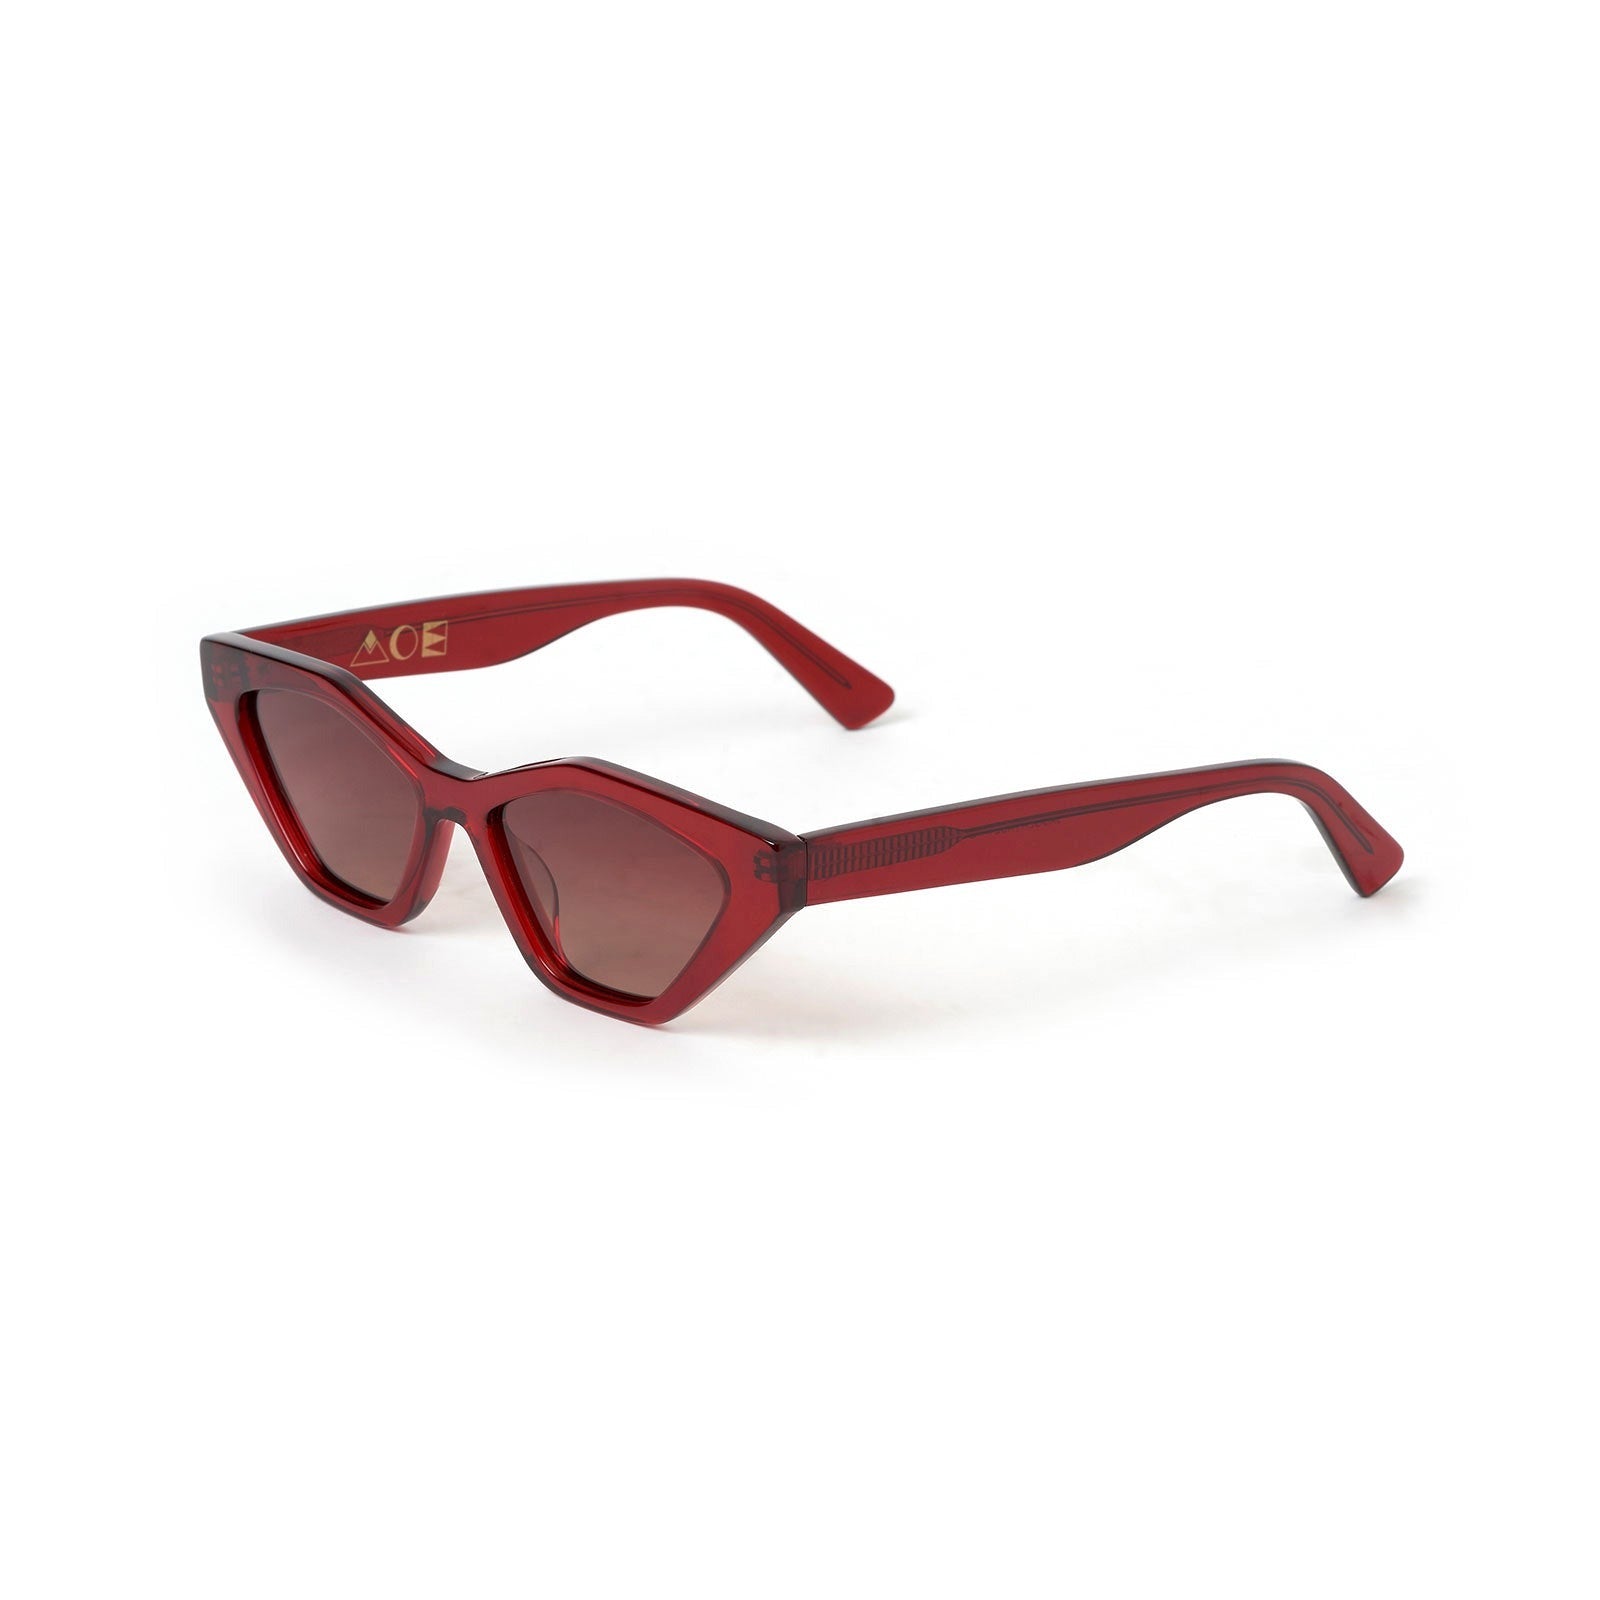 Arms Of Eve | Jagger Sunglasses - Cherry Red